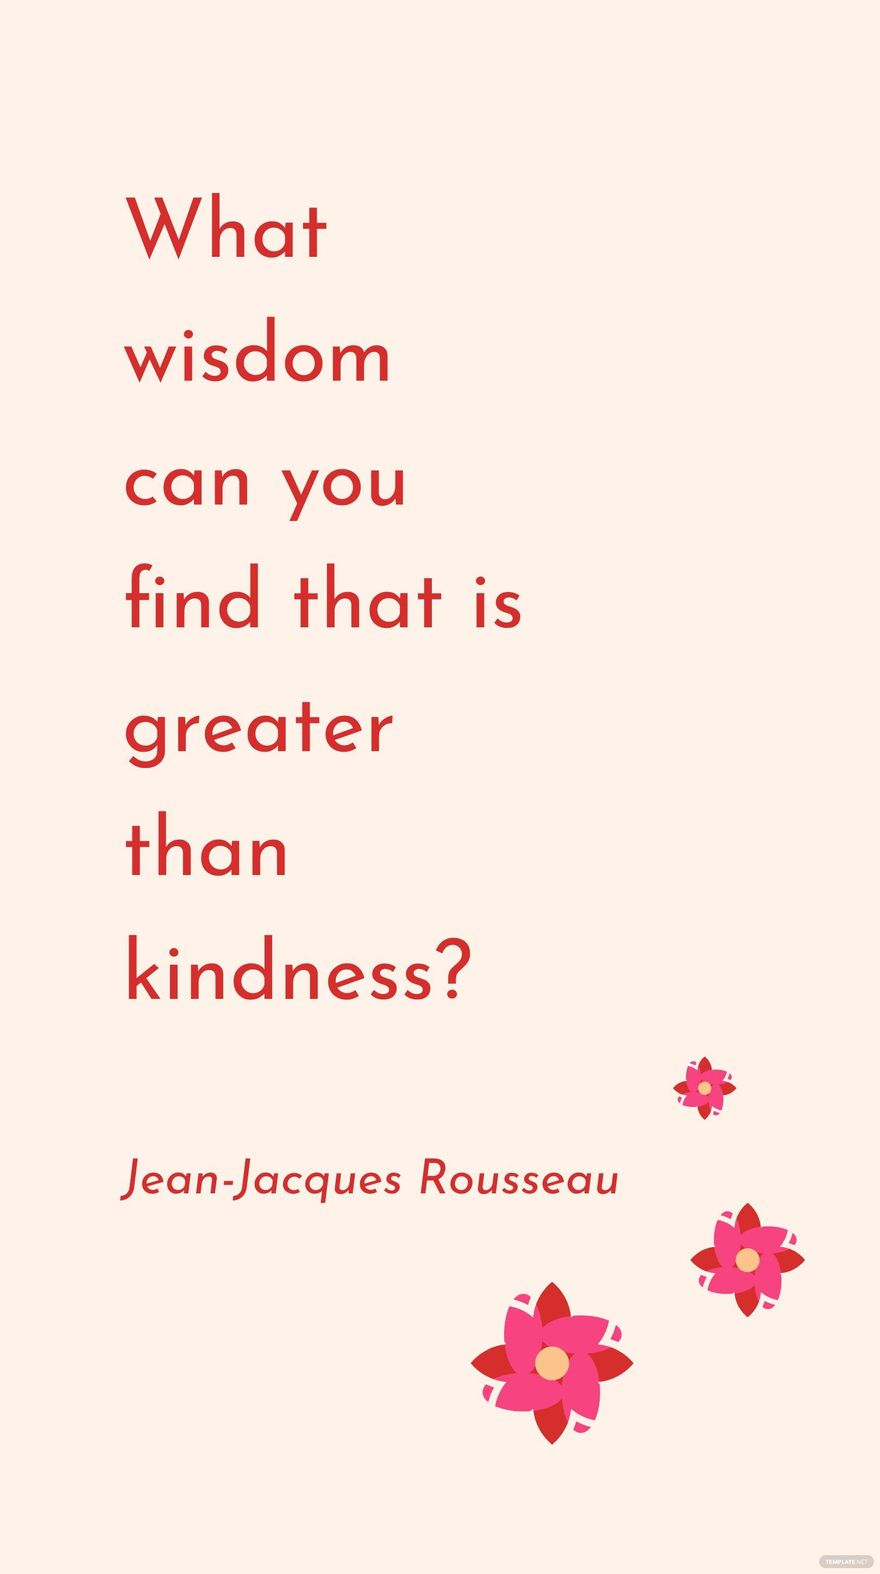 Free Jean-Jacques Rousseau - What wisdom can you find that is greater than kindness? in JPG